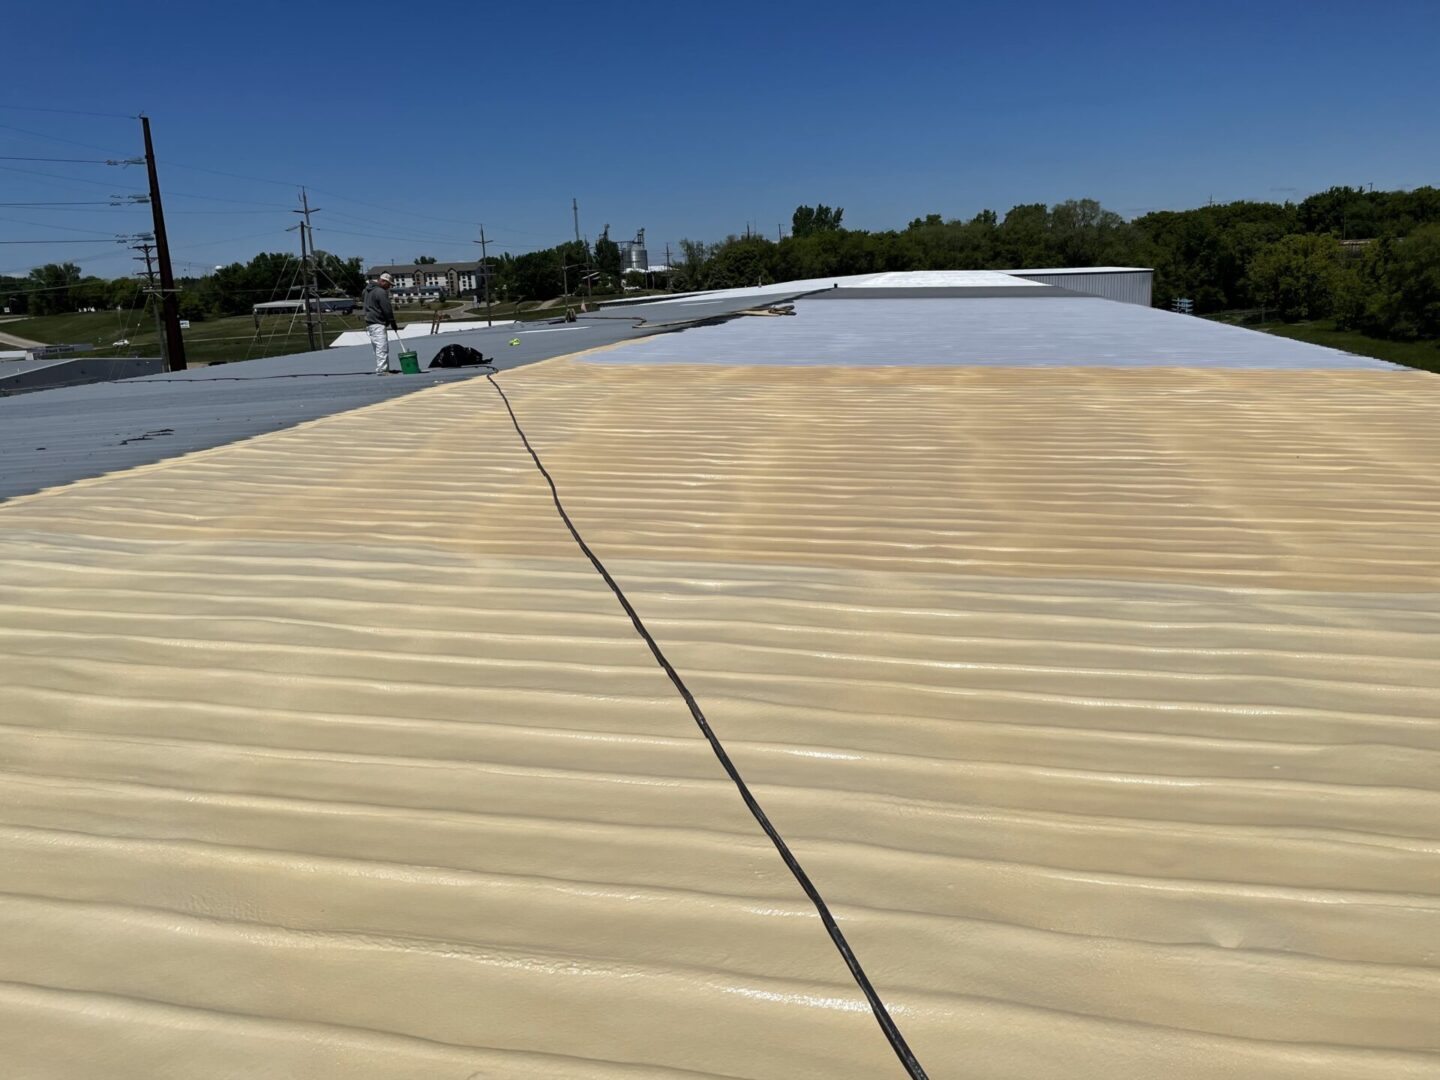 Rooftop level with insulation